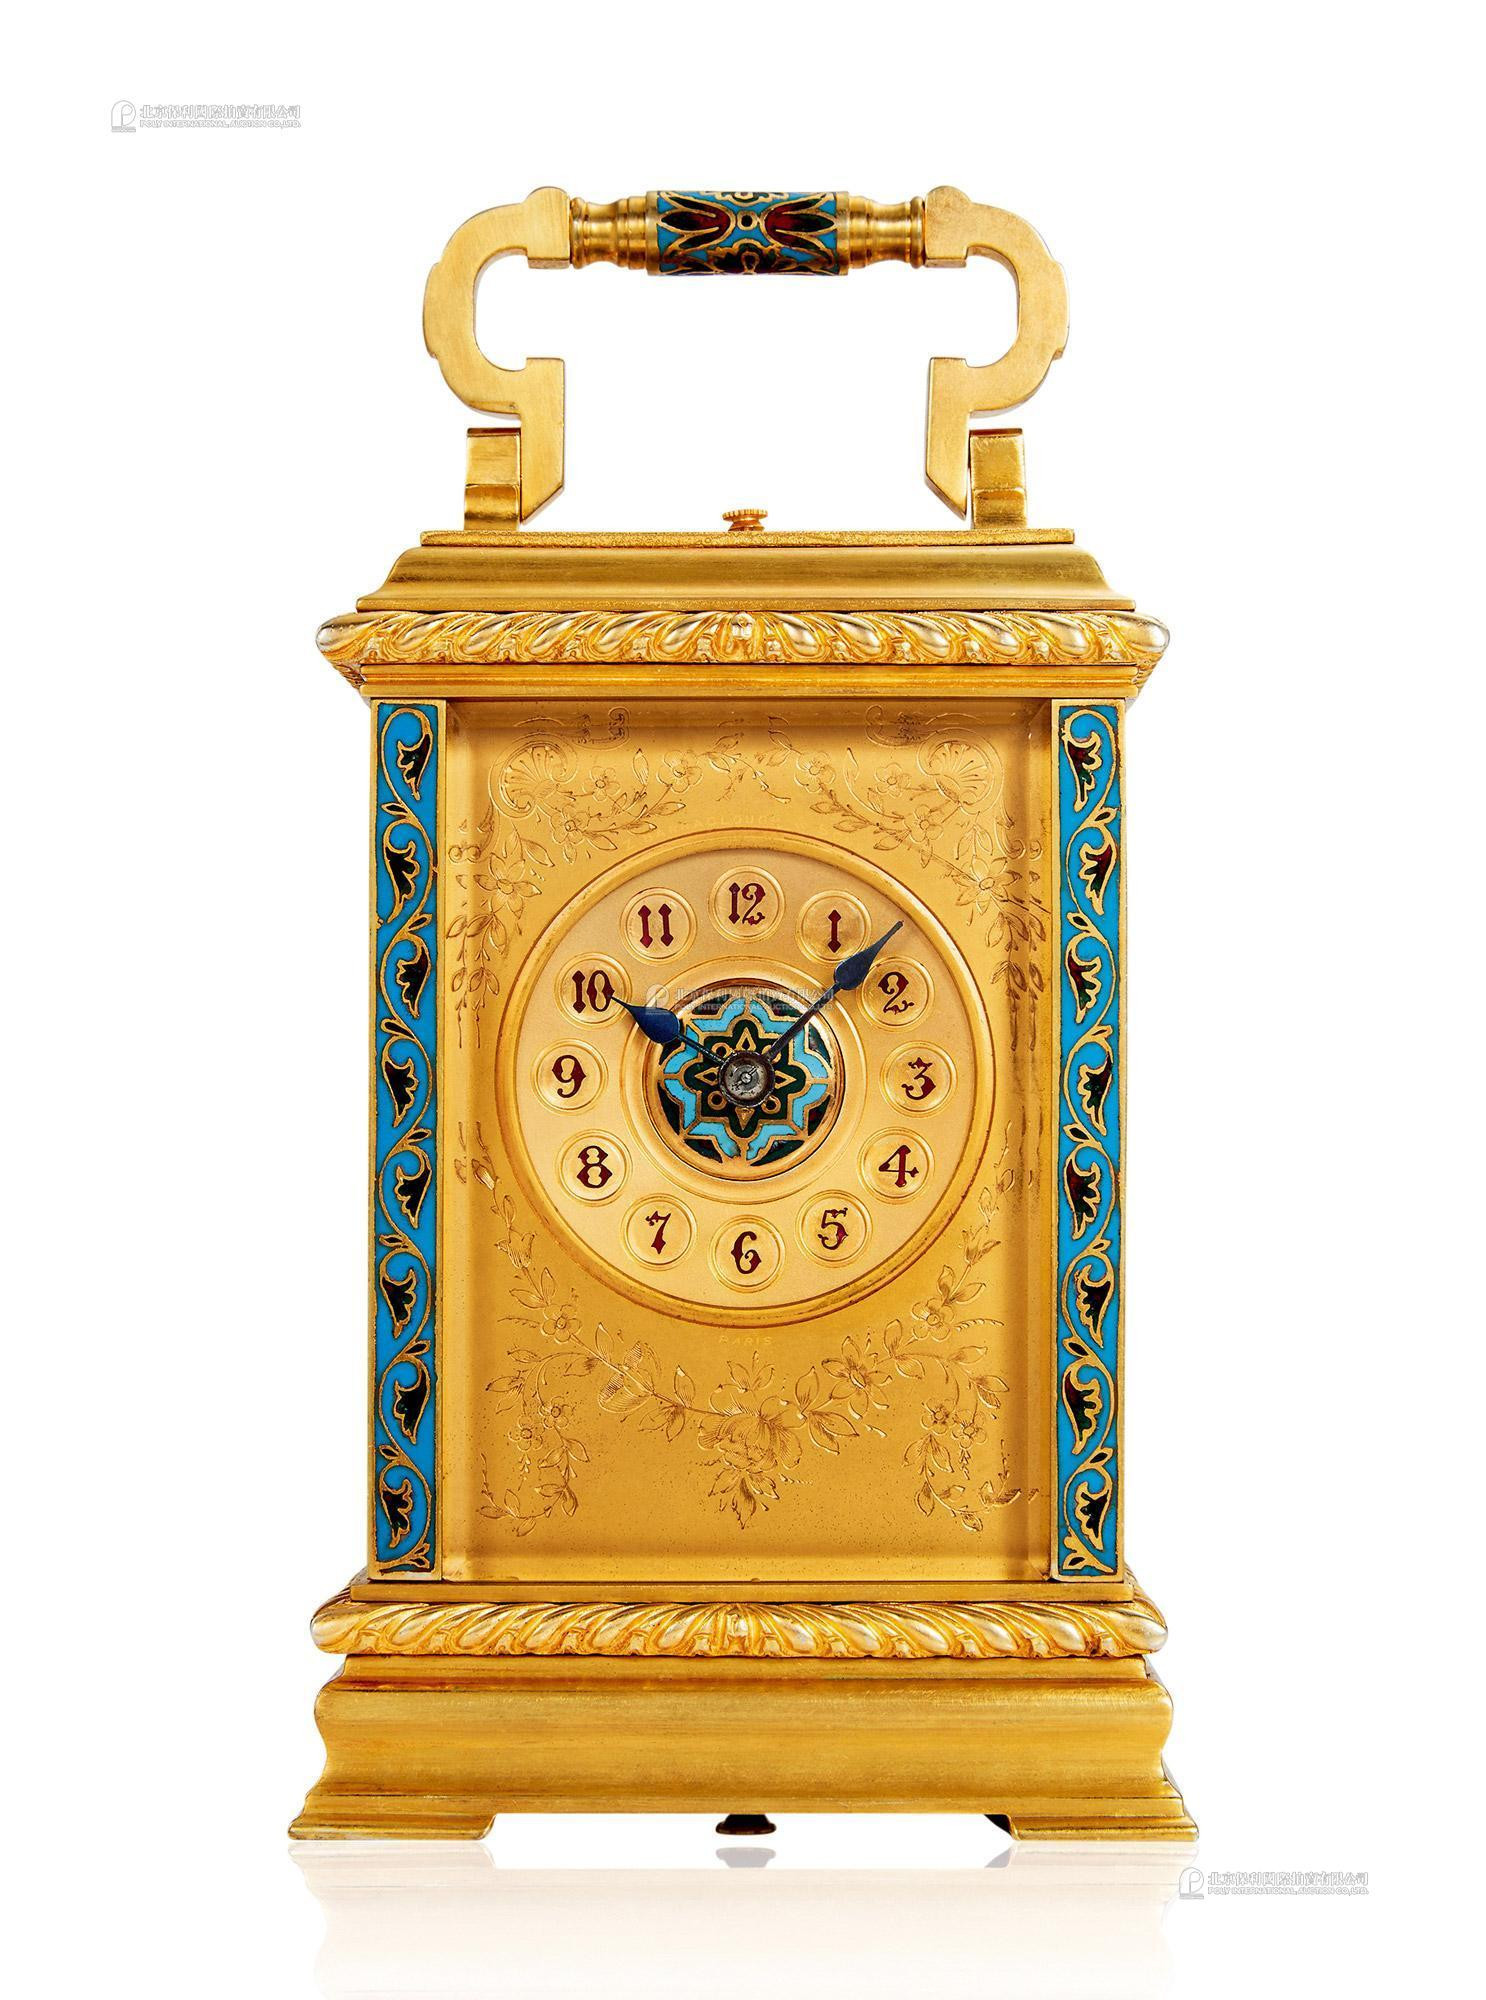 EUROPE A GILT BRONZE AND ENAMEL SET MANUALLY-WOUND TABLE CLOCK WITH KEY